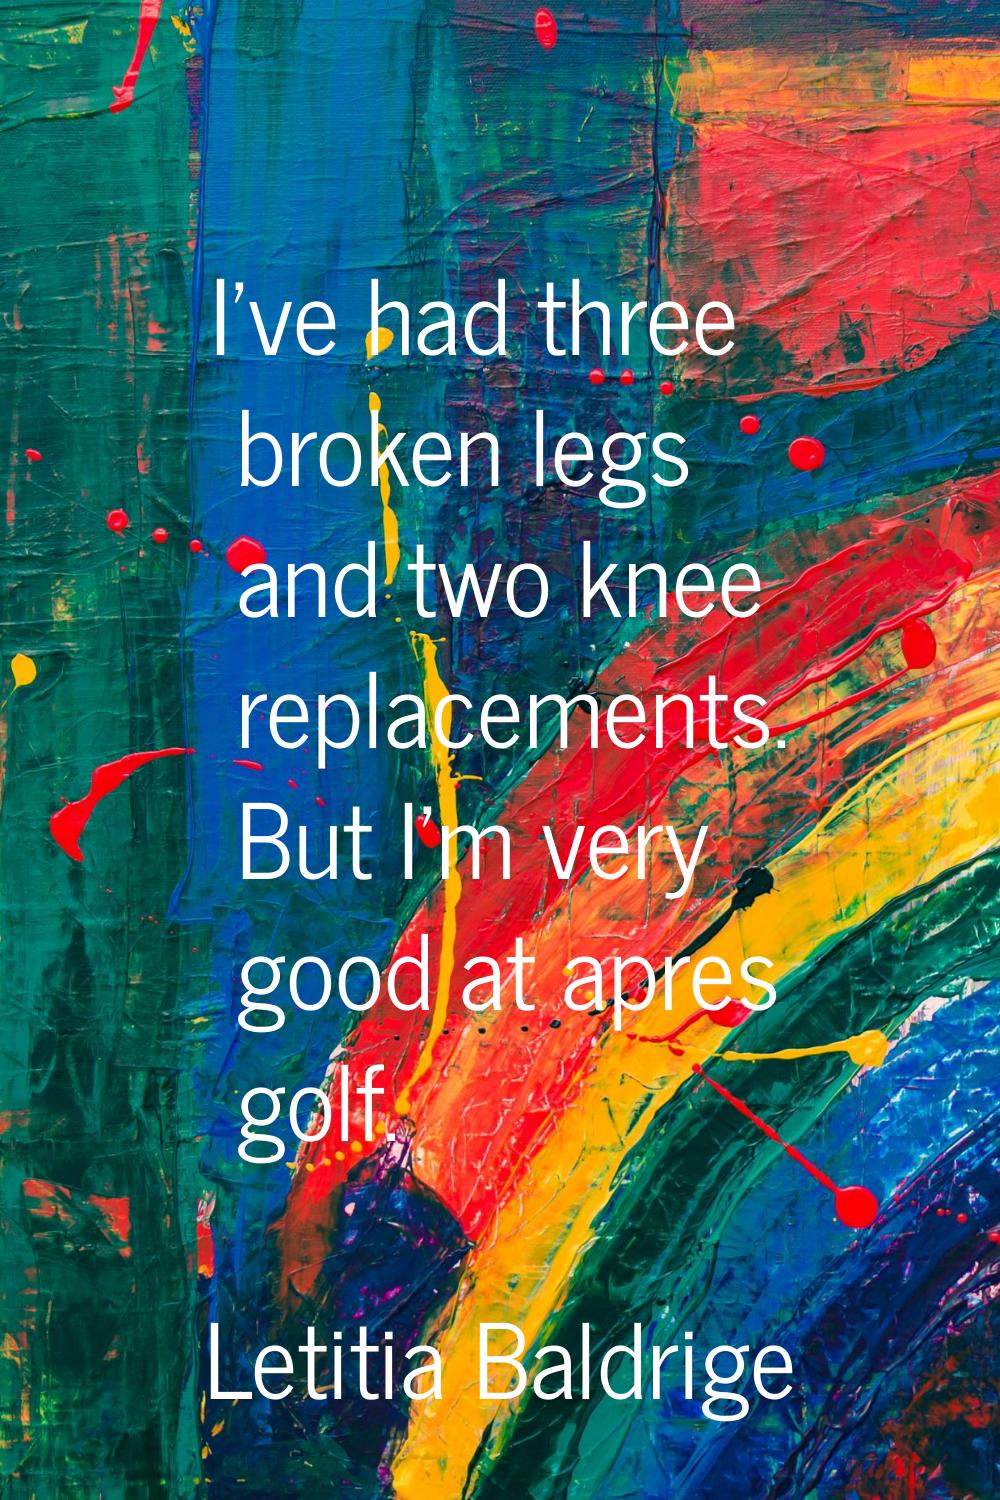 I've had three broken legs and two knee replacements. But I'm very good at apres golf.